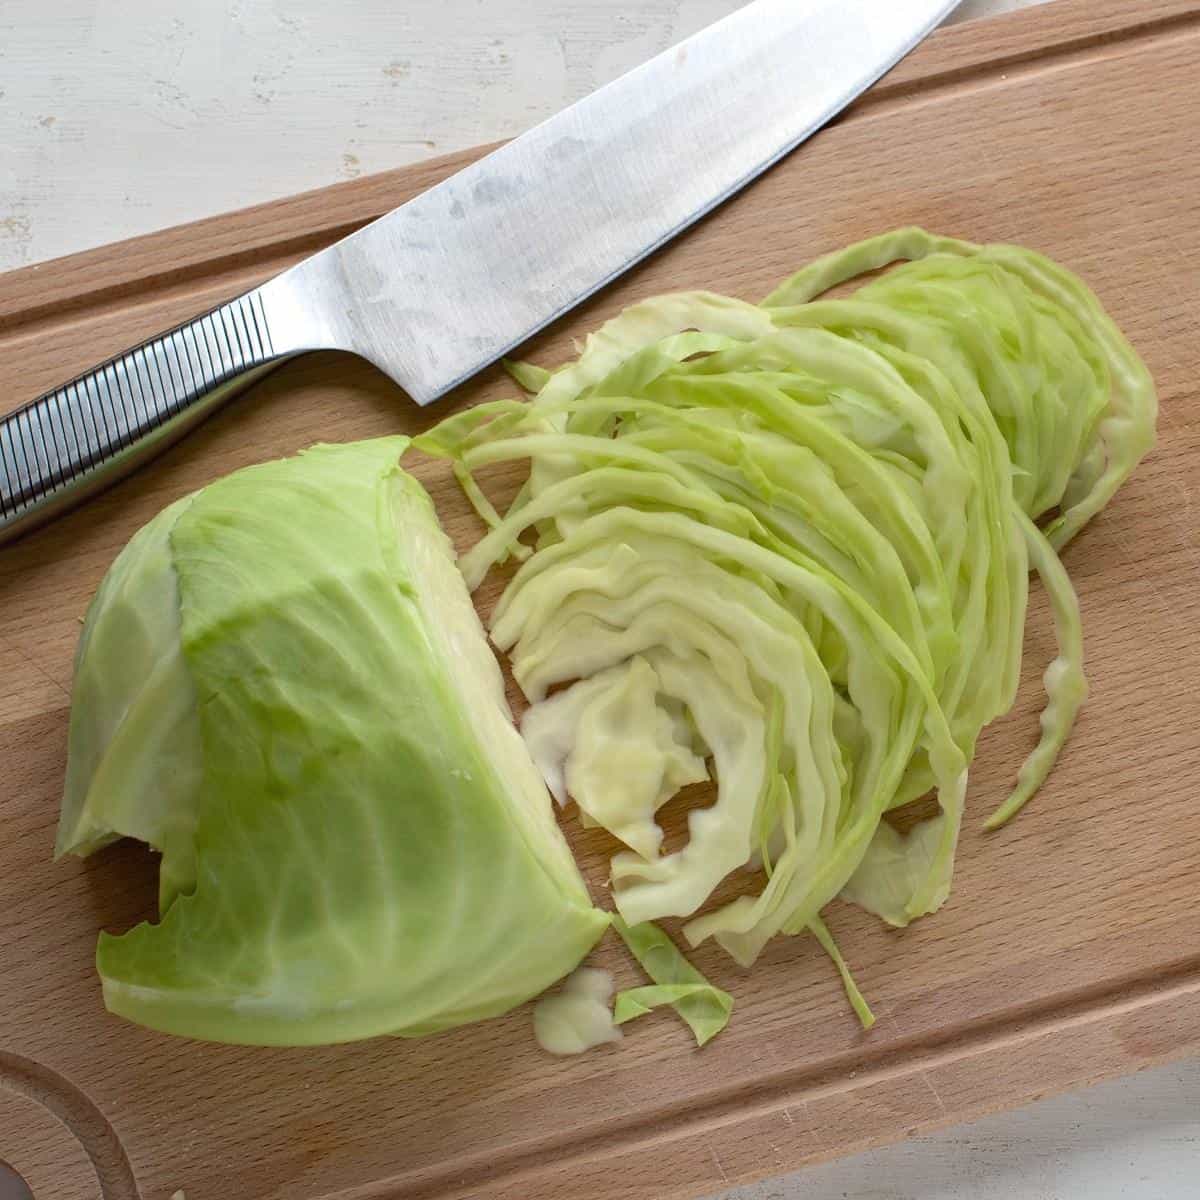 Slicing green cabbage on a cutting board with a knife.